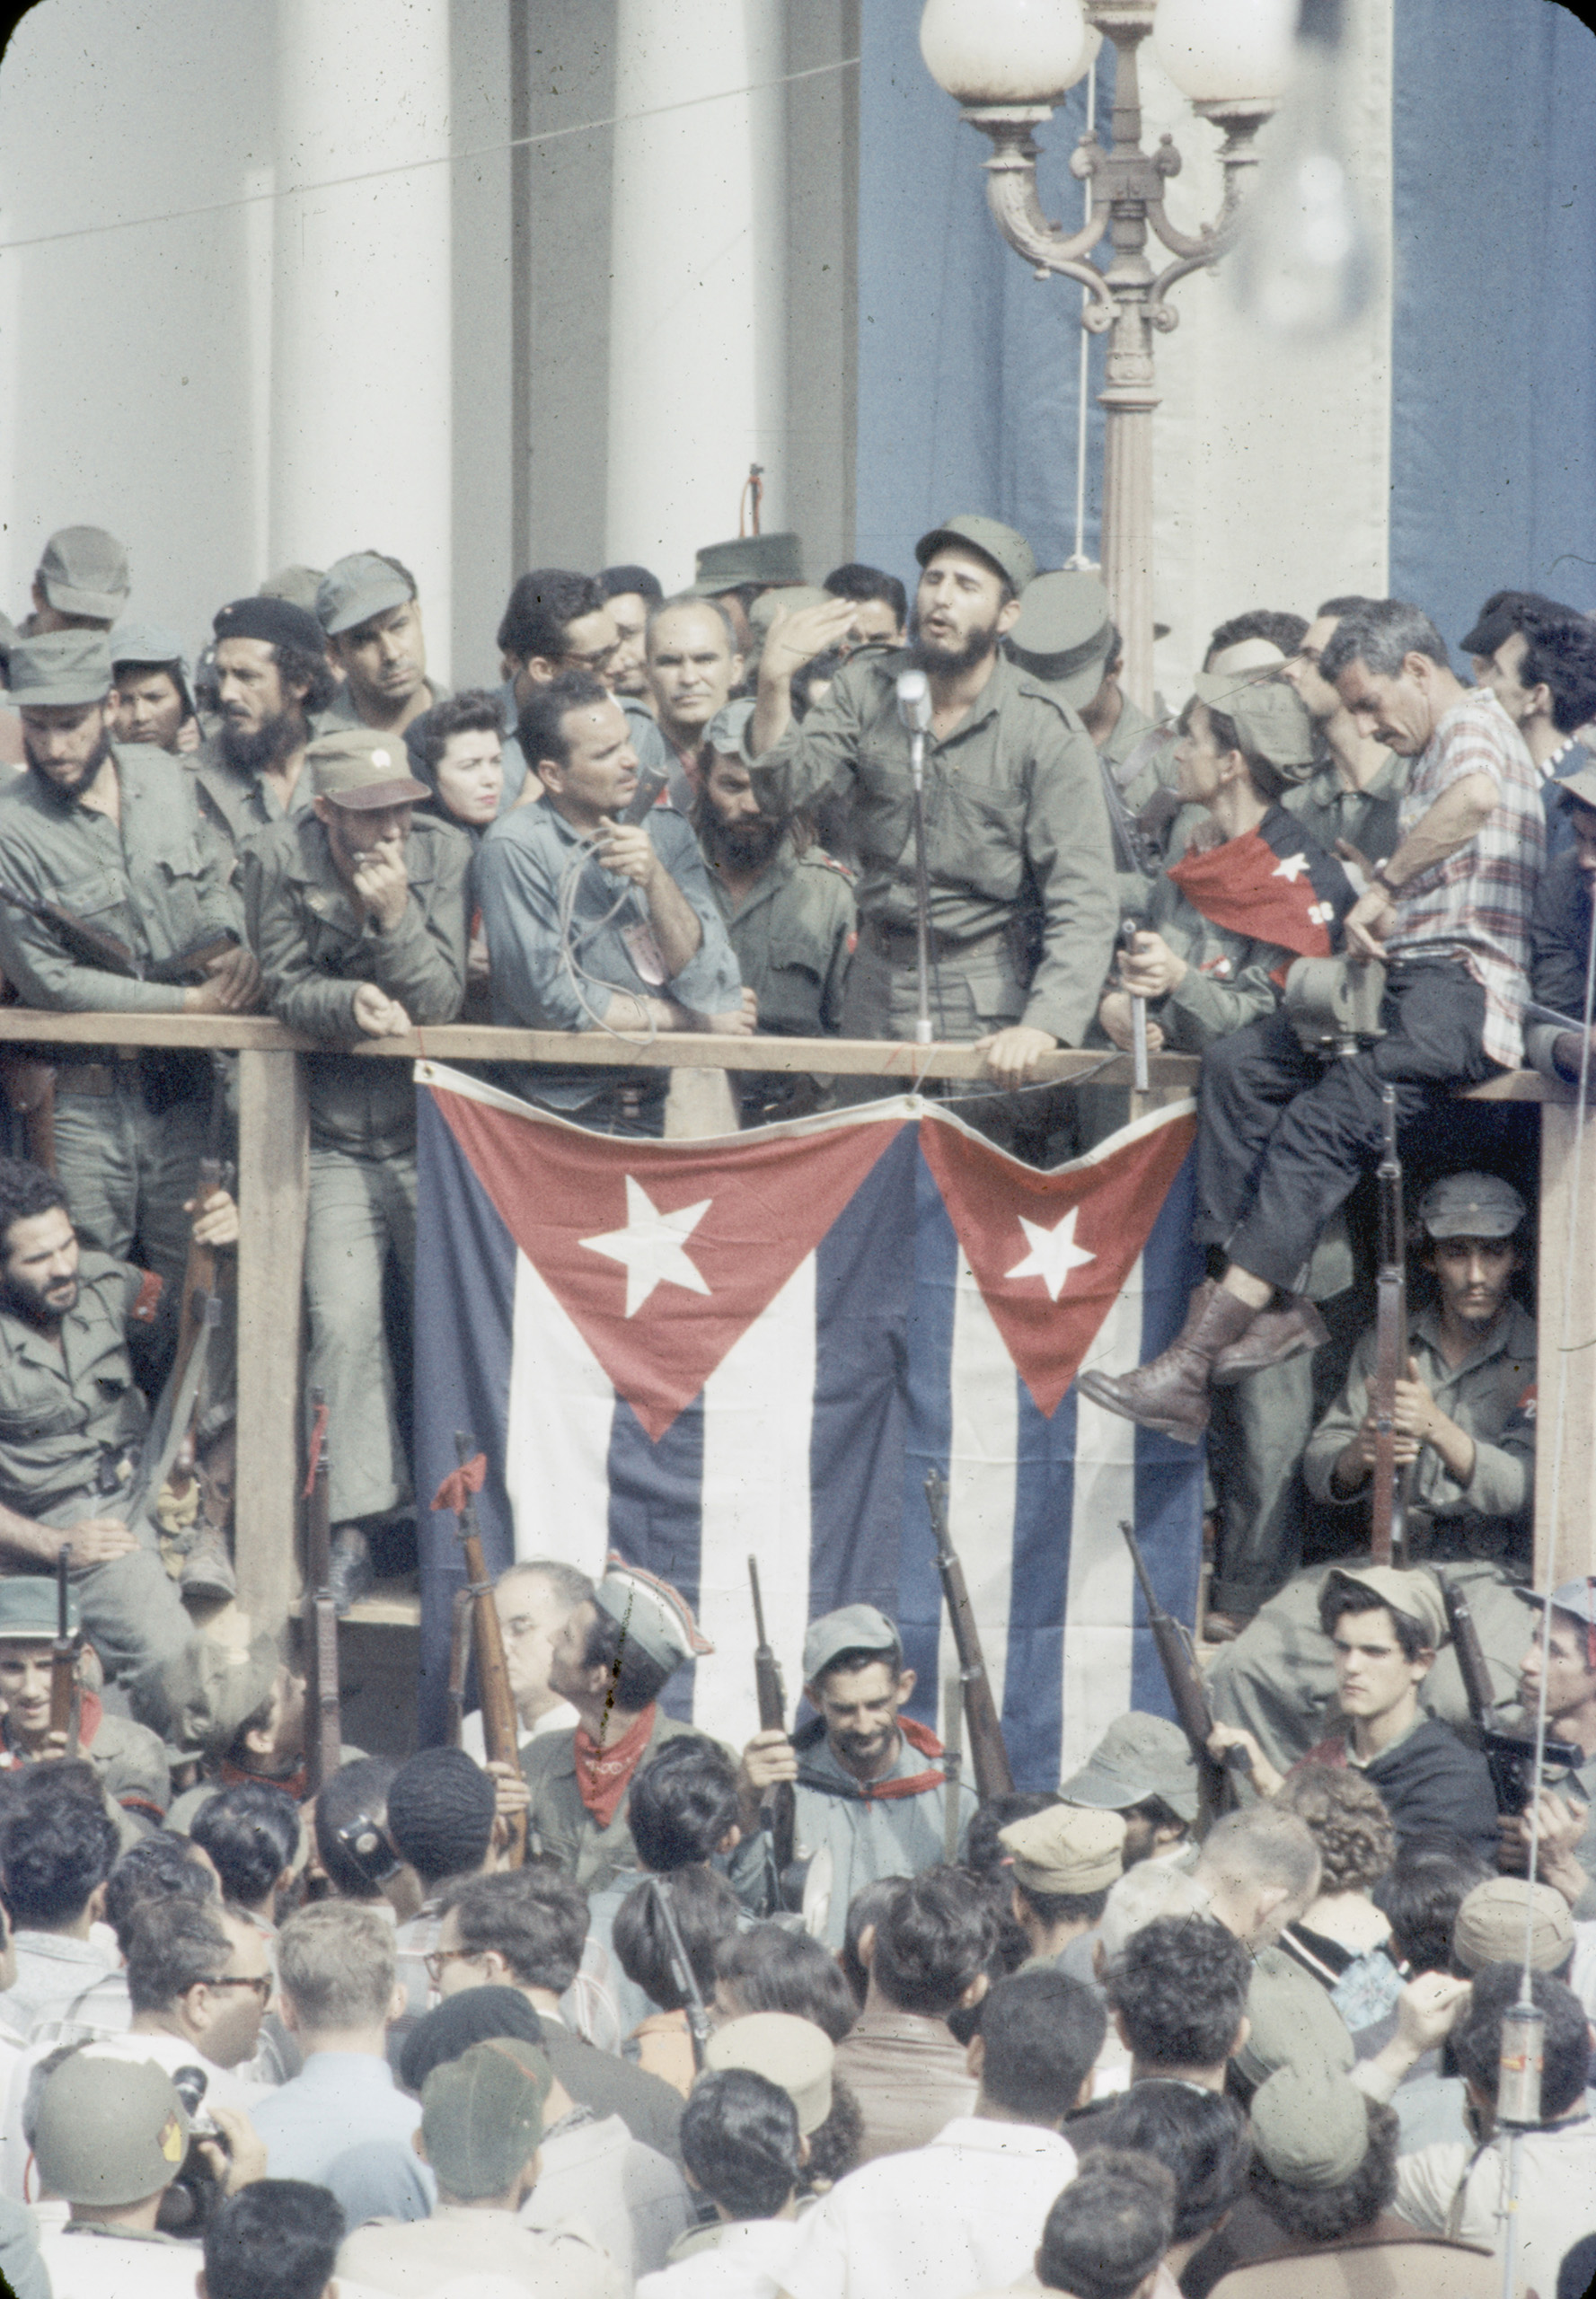 Cuban leader Fidel Castro speaking to people of Santa Clara in the town square.